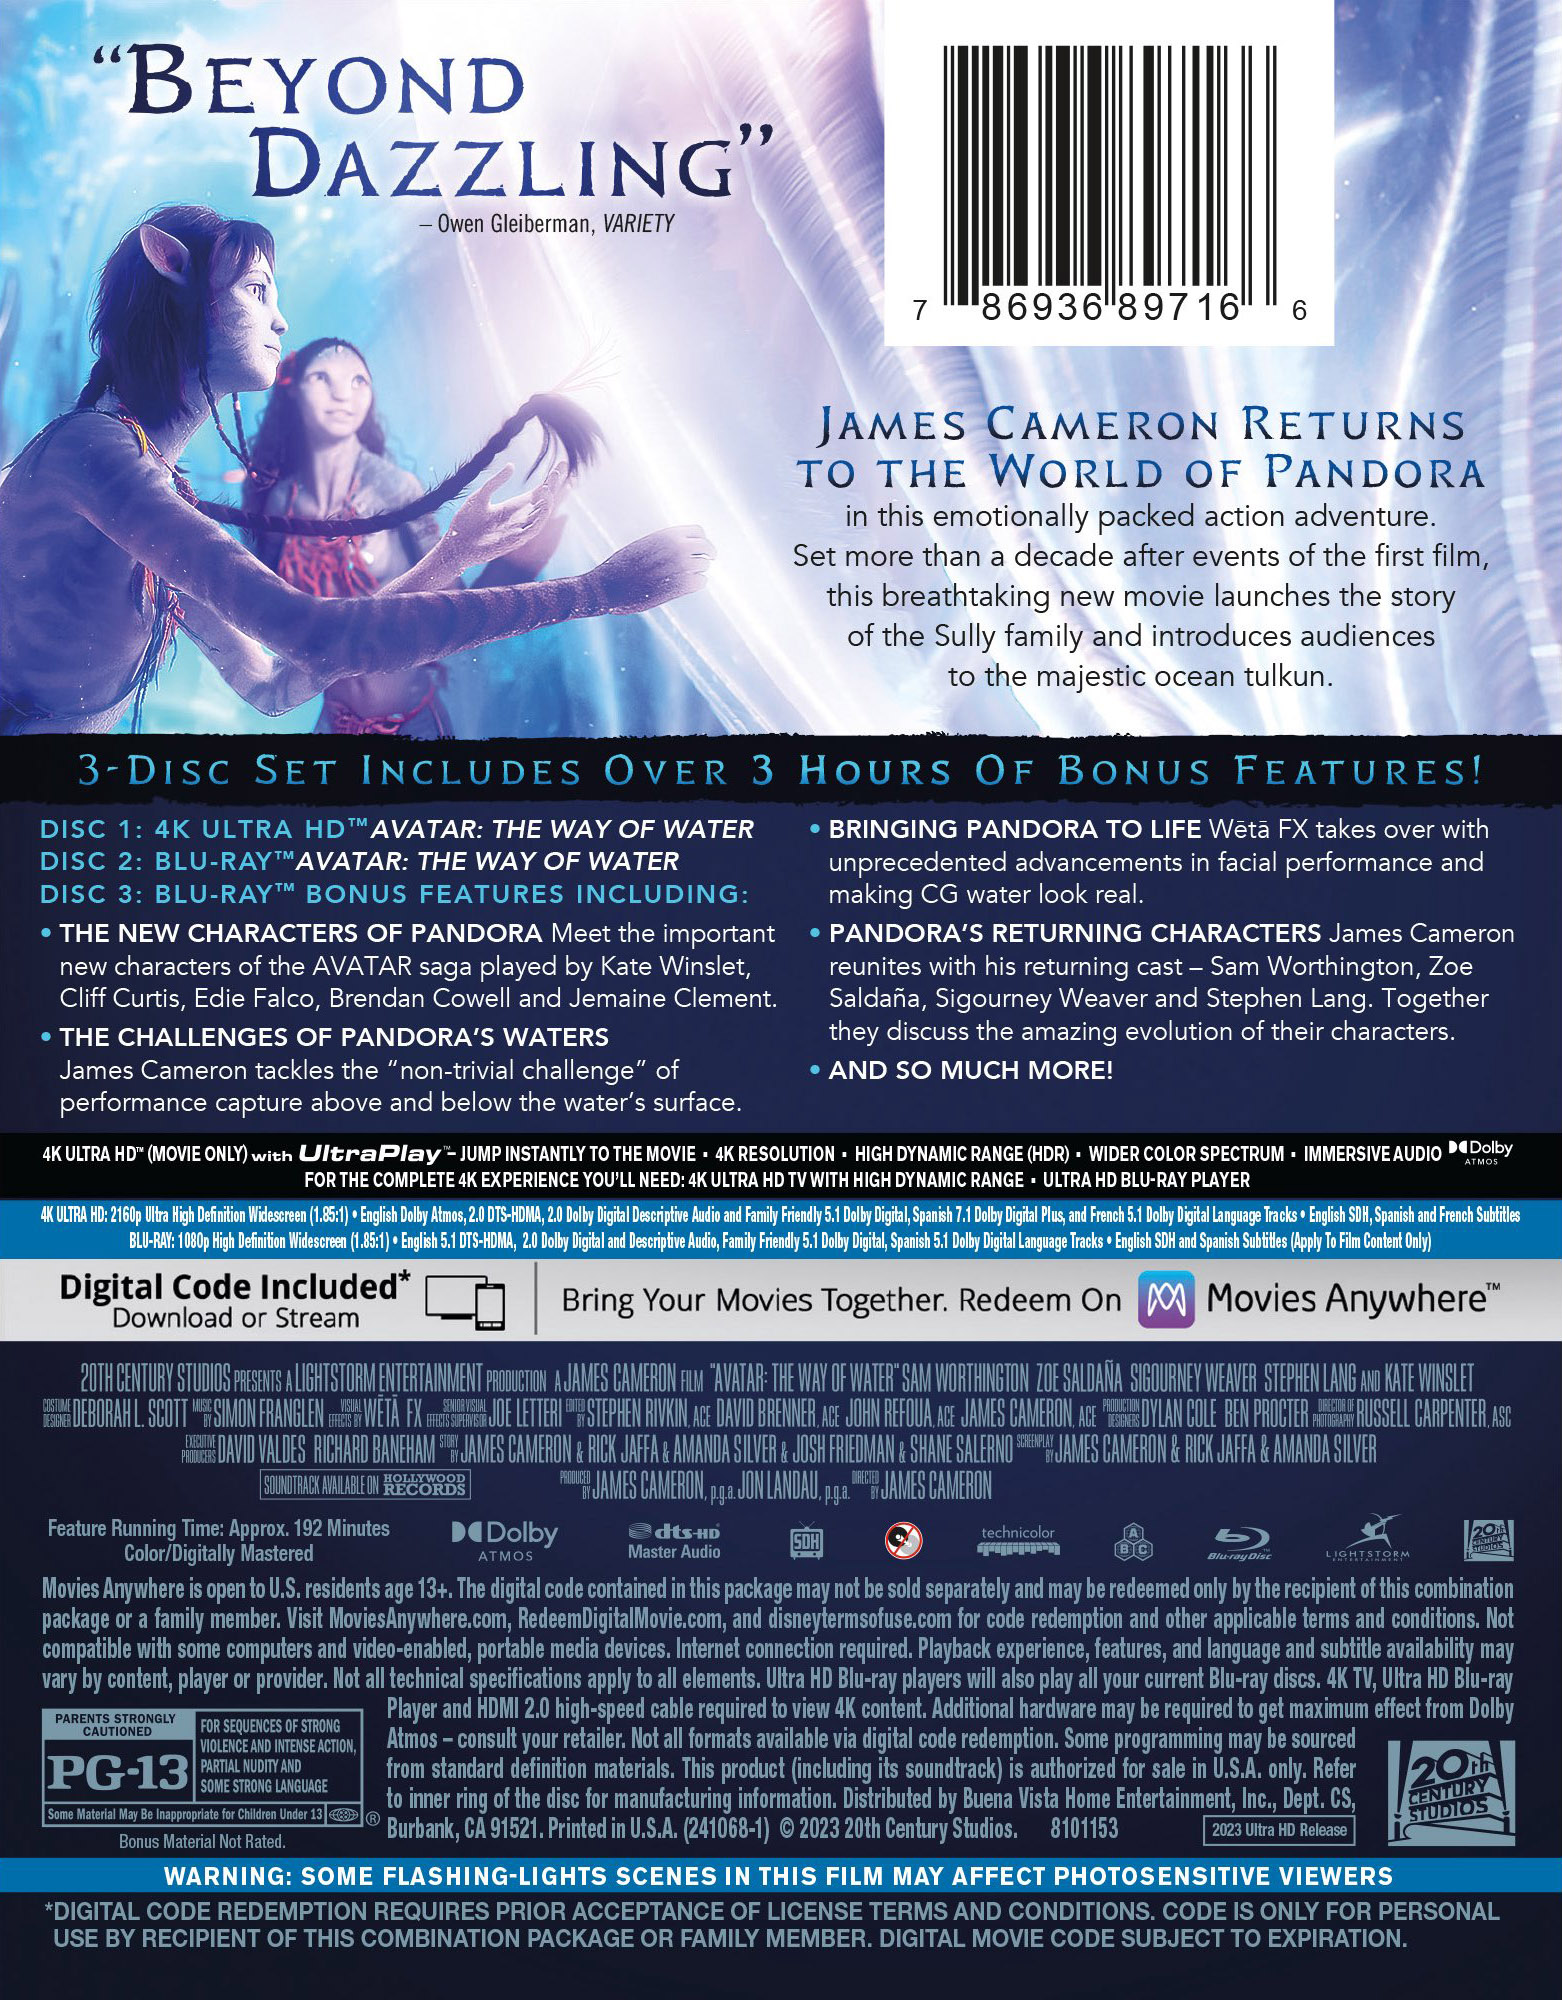 Avatar: The Way of Water 4k Blu-ray specs